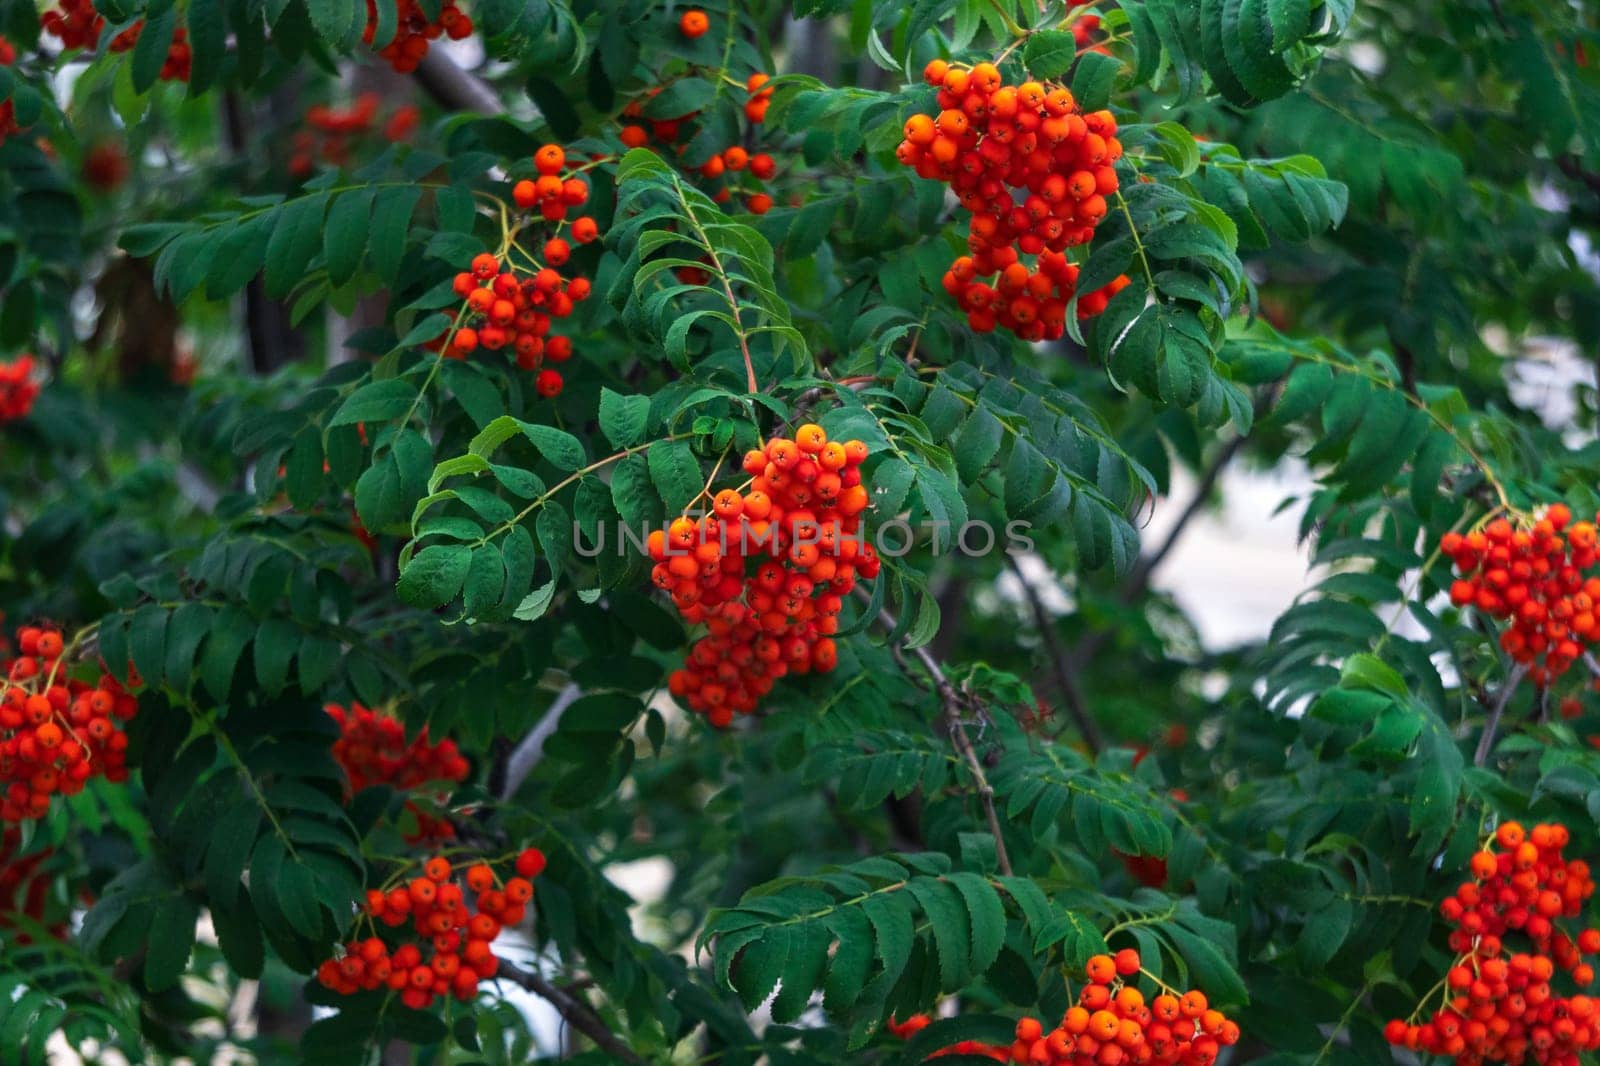 Rowan berry growing in clusters on the branches of a rowan tree. Selective focus by darksoul72